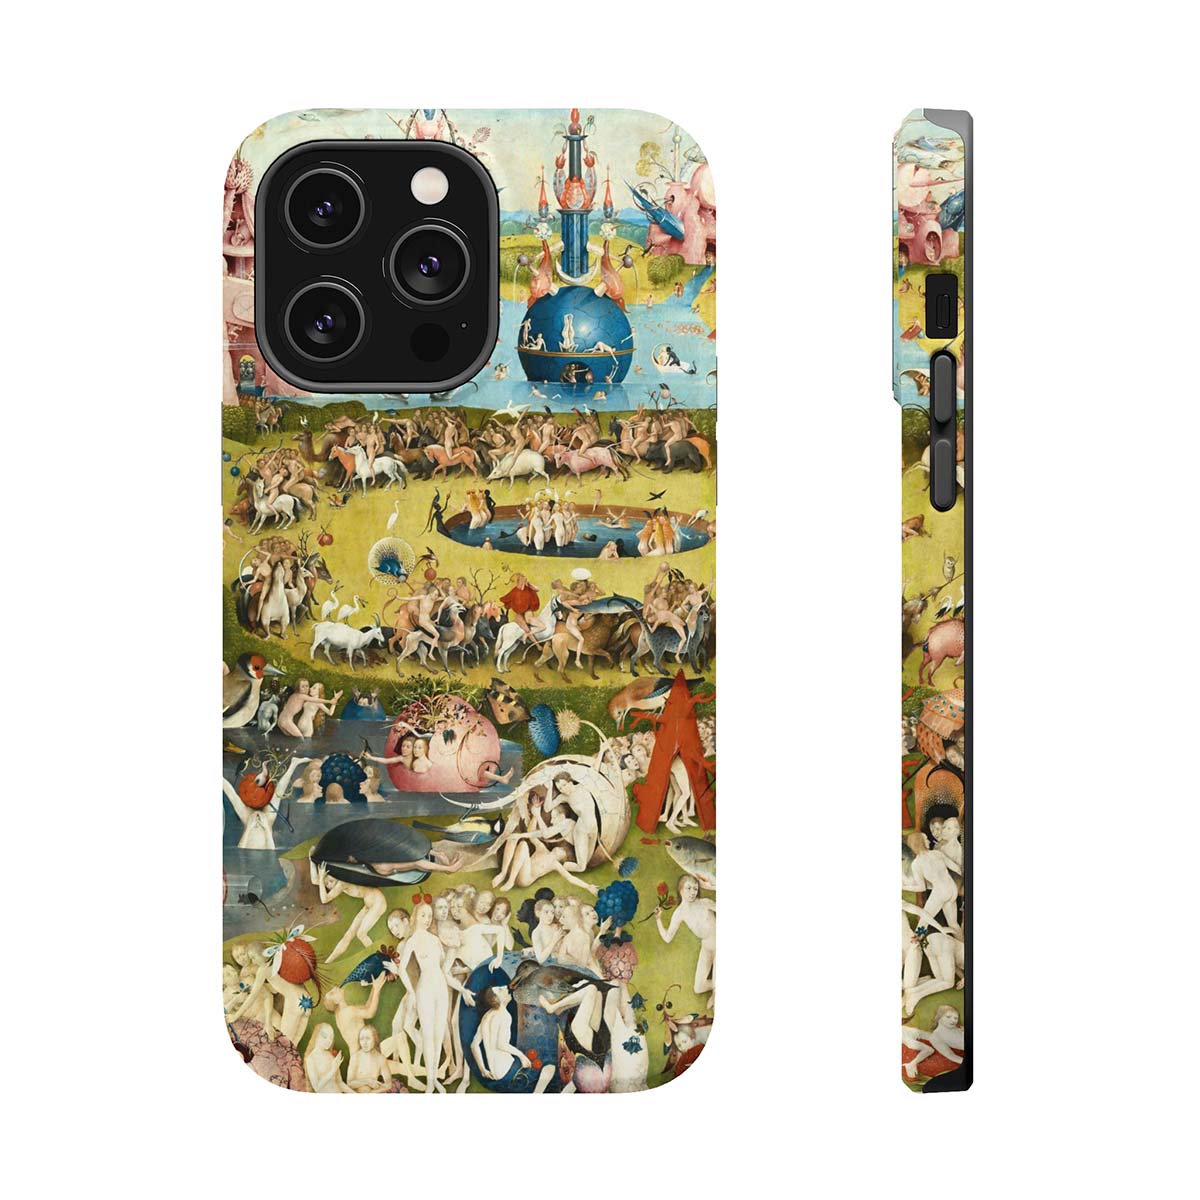 Famous Painting Inspired iPhone Accessory